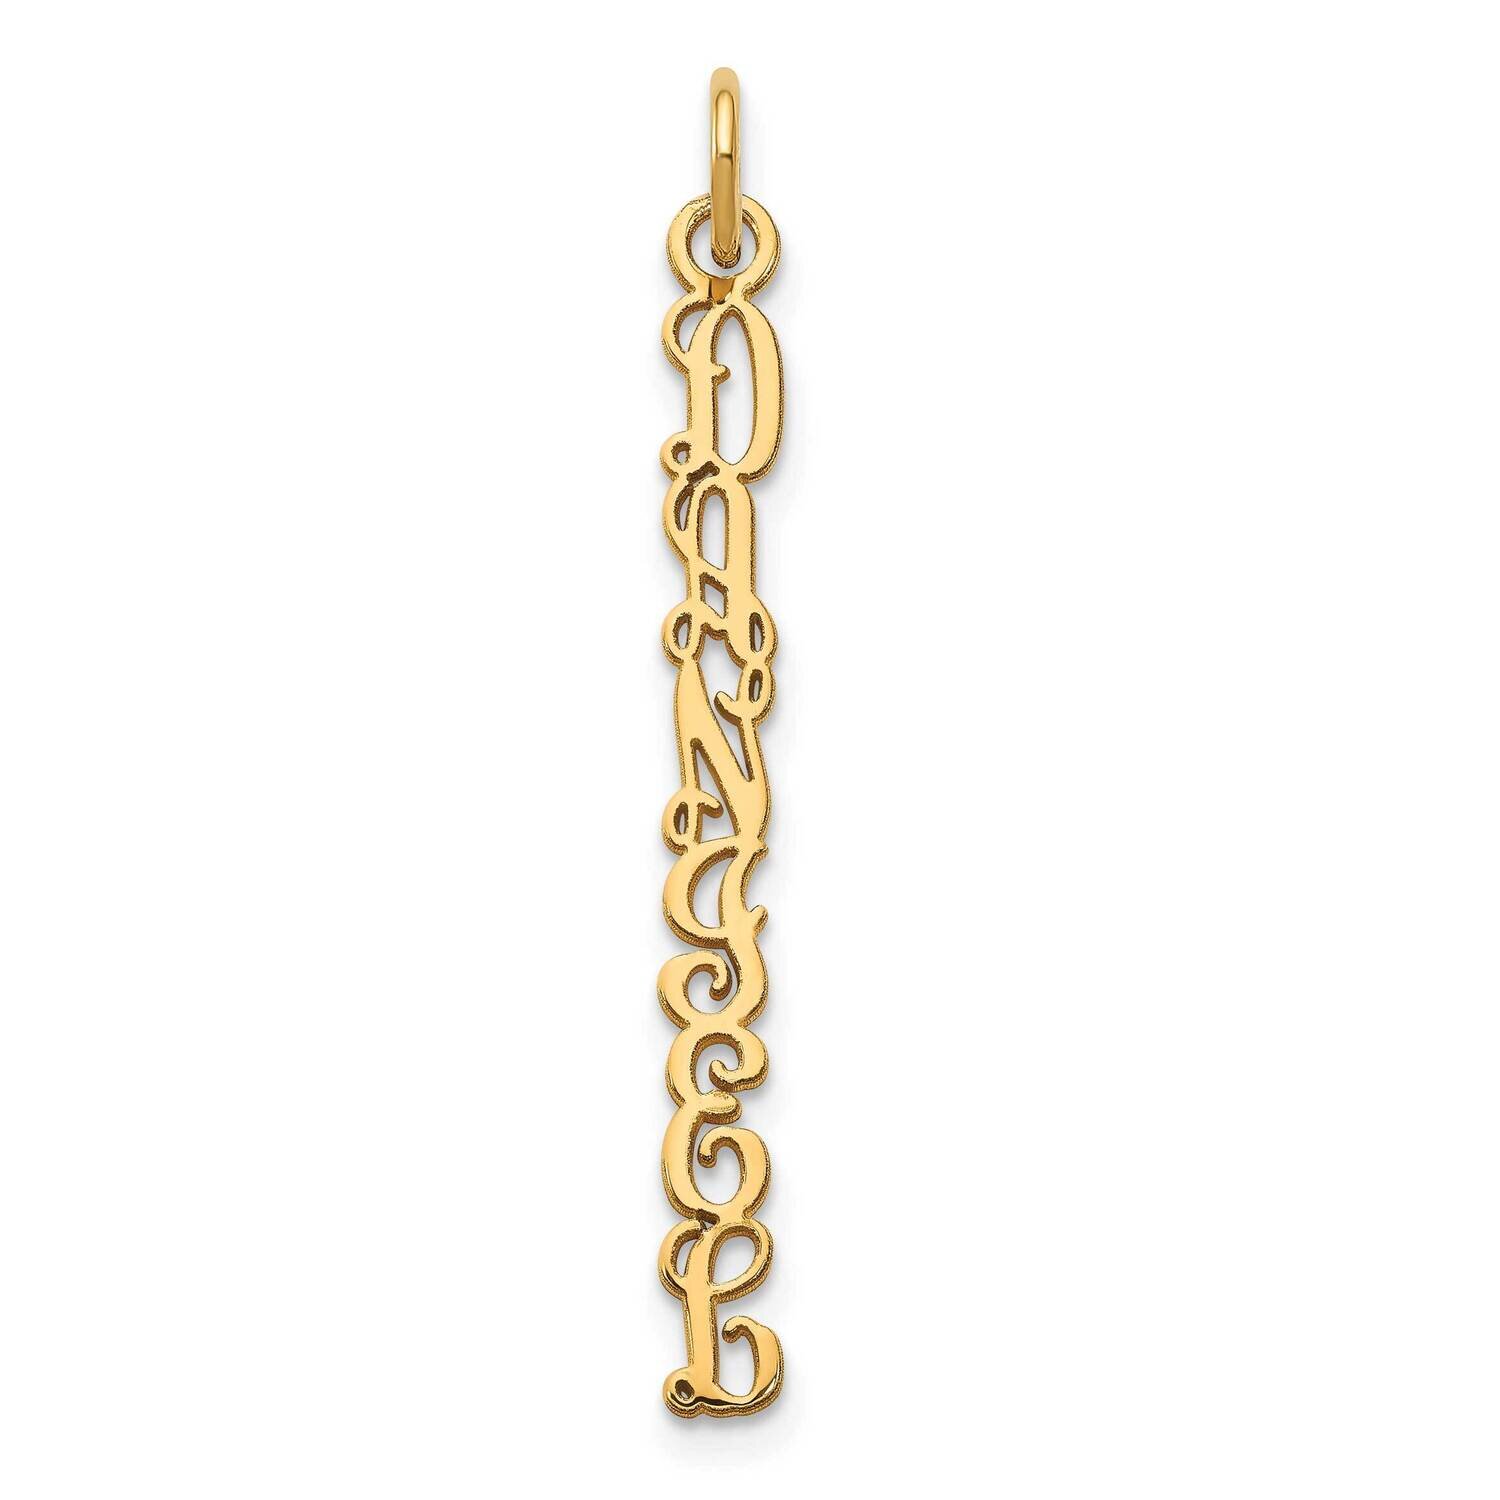 Qg Vine Font Name Plate Charm Sterling Silver Gold-plated XNA1175GP